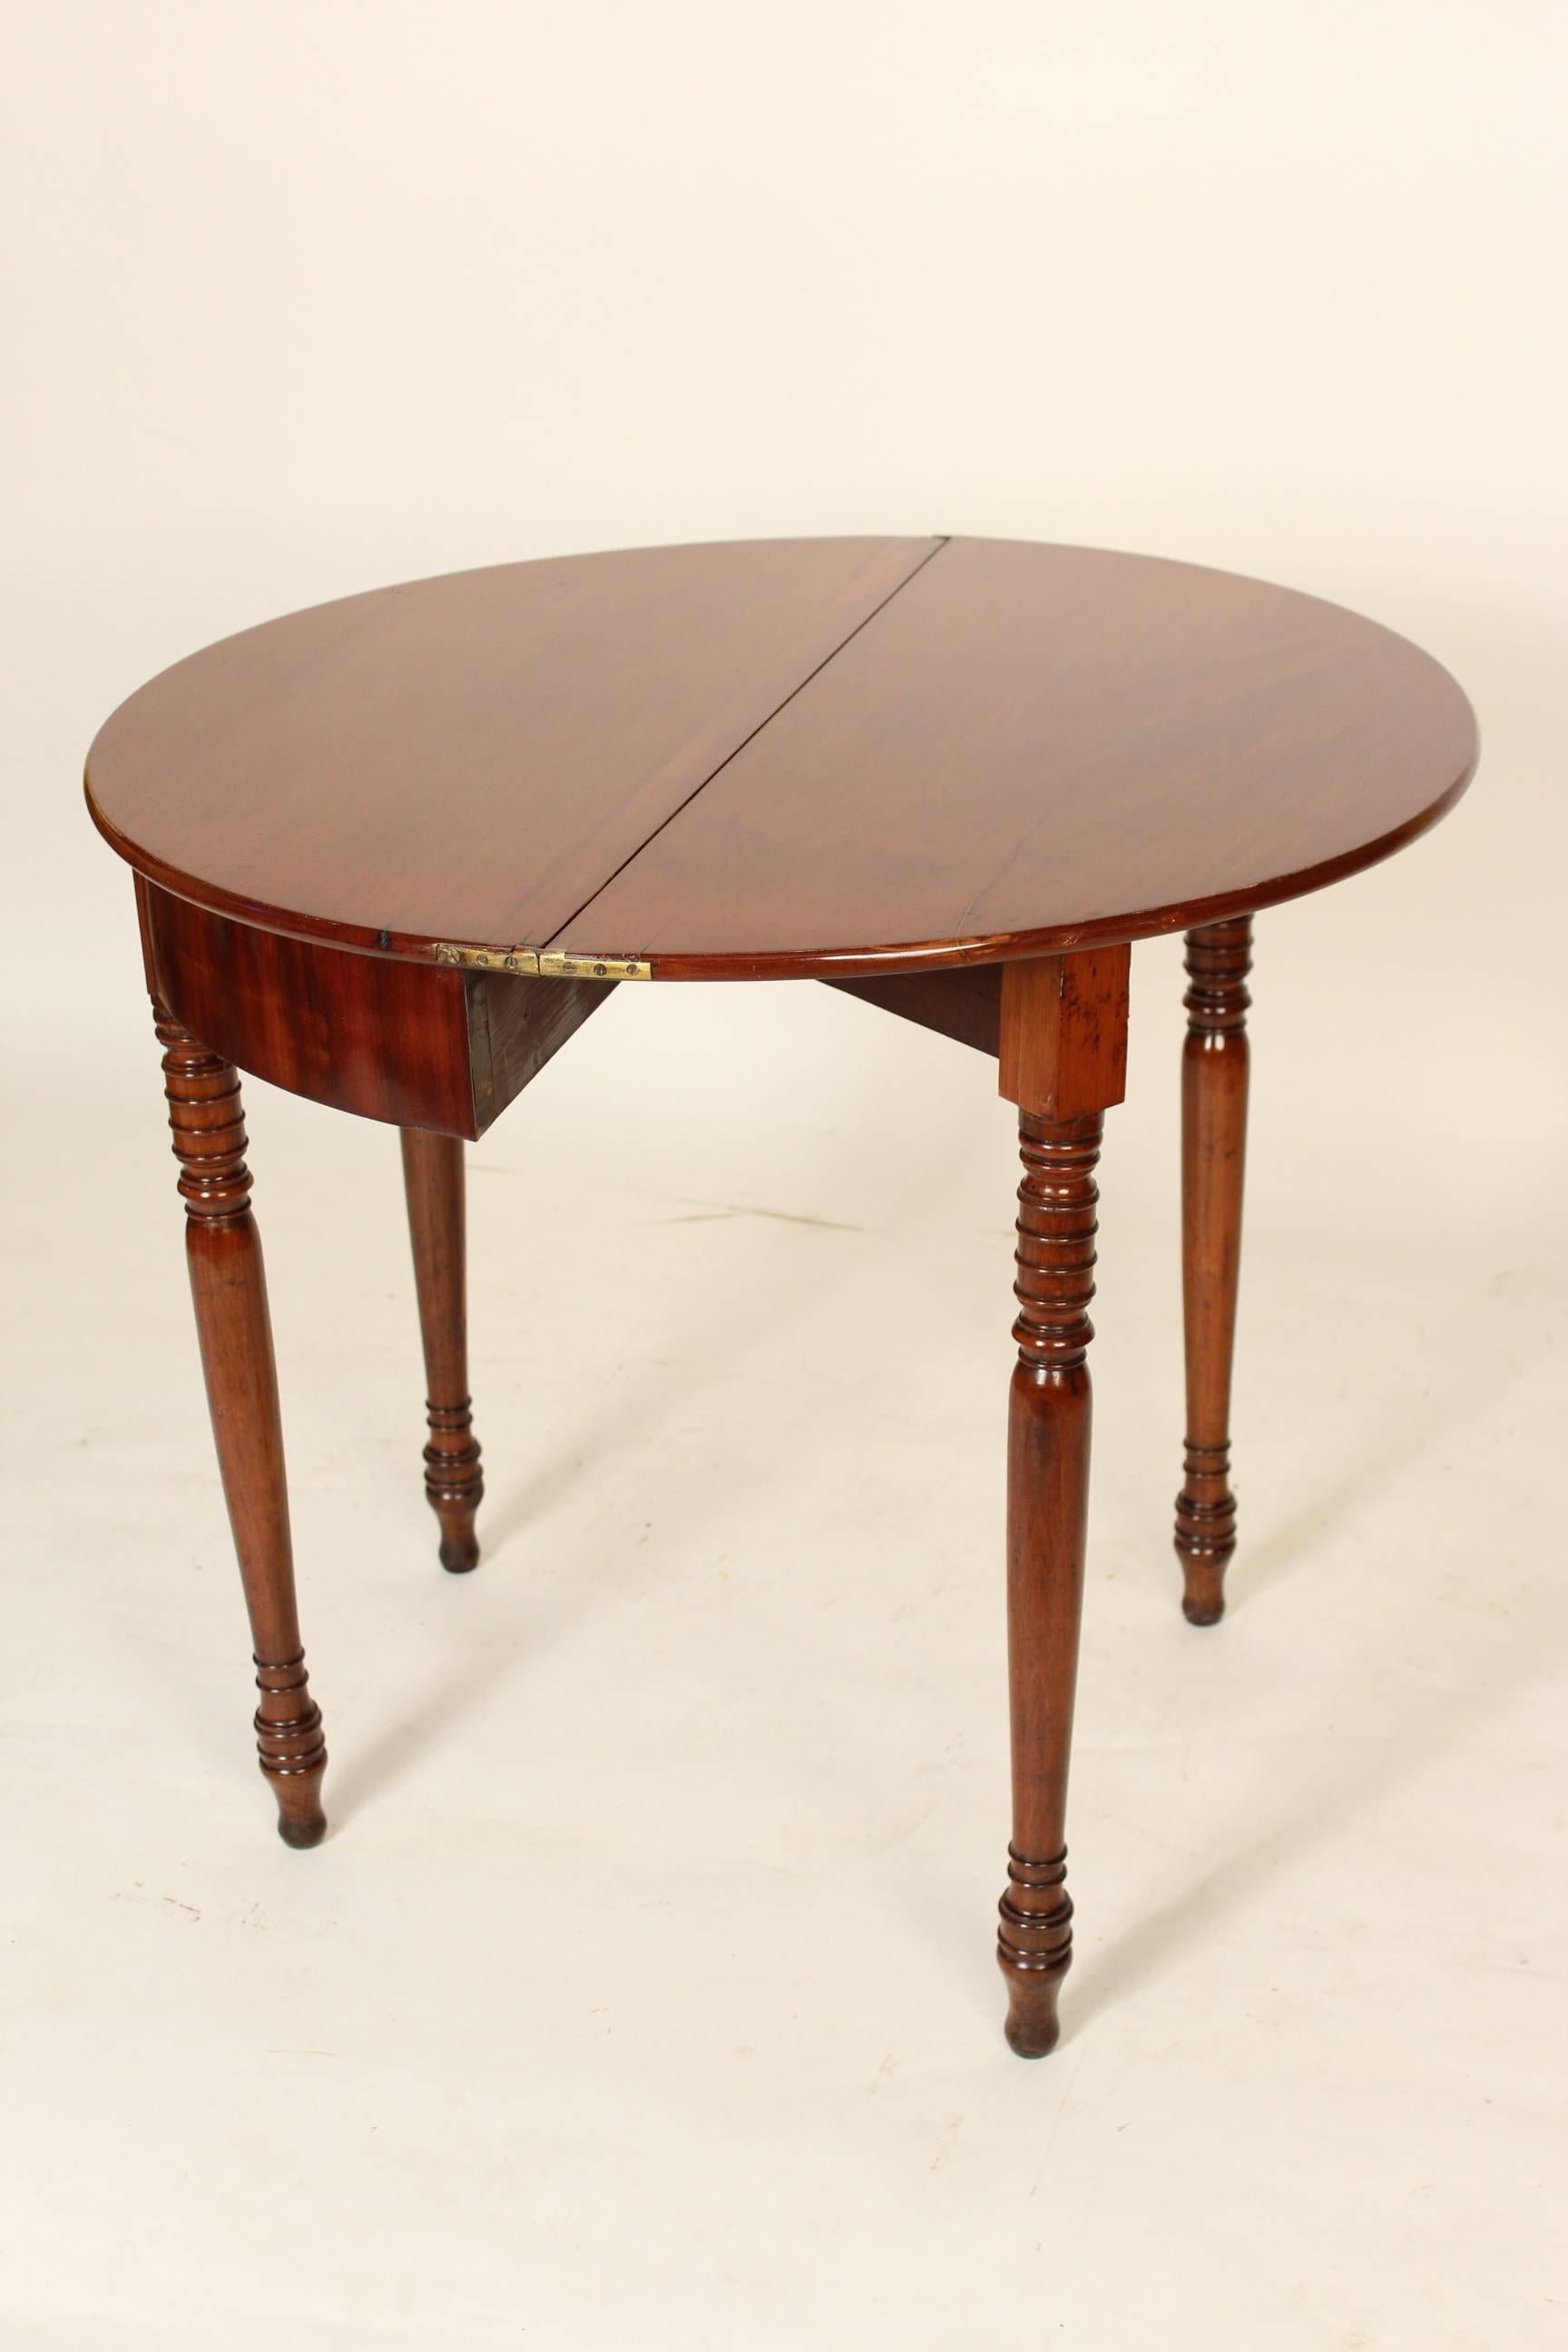 Charles X mahogany Demilune games table, circa 1830. The diameter when the top is opened is 33.5